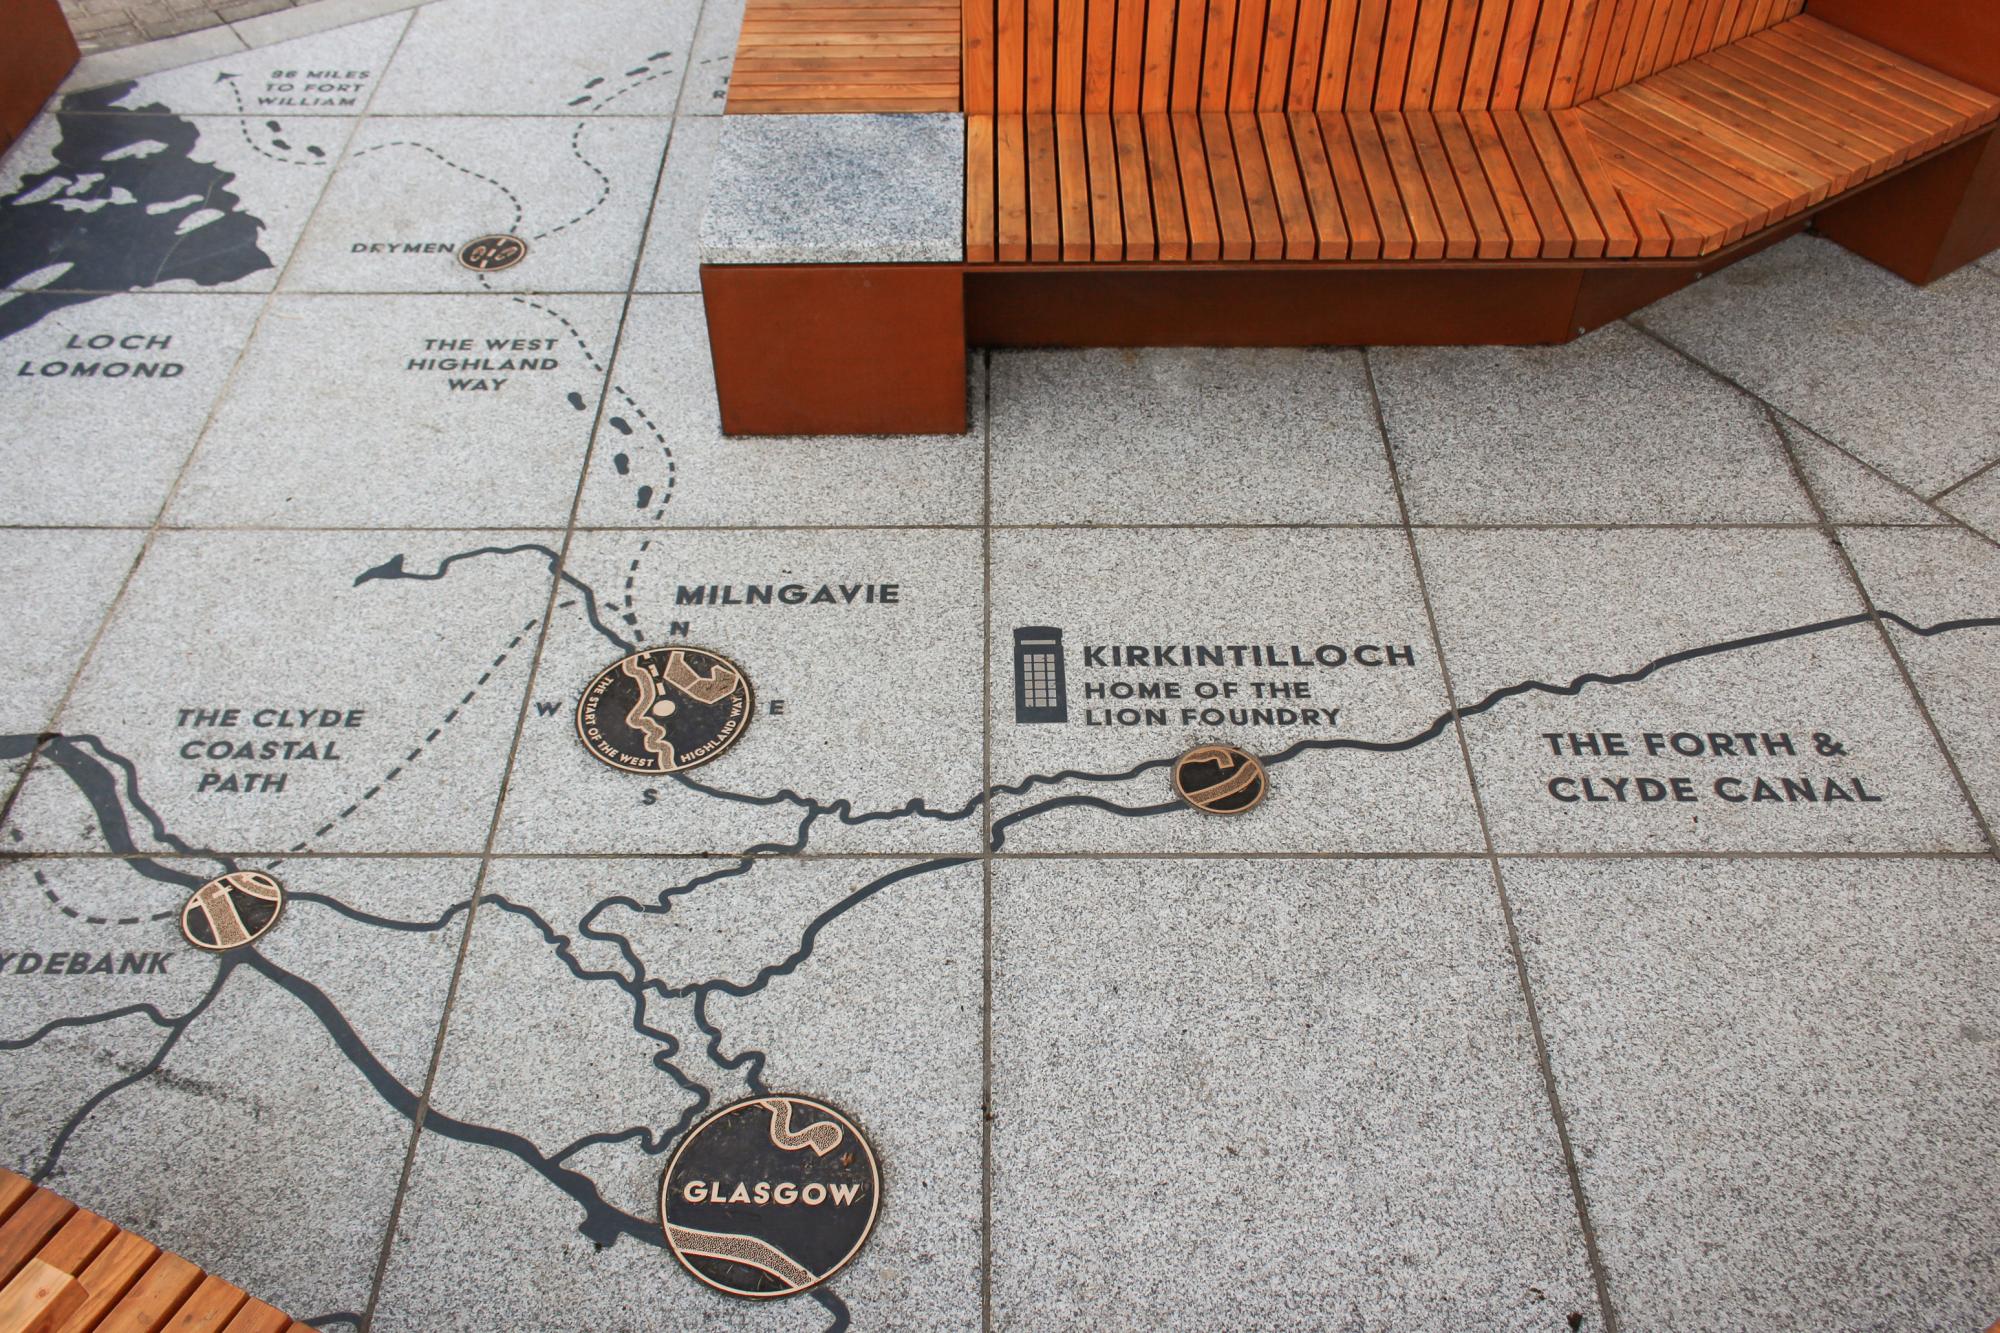 map drawn on white tile floor showing the location of glasgow, milngavie, kirkintilloch and the canal